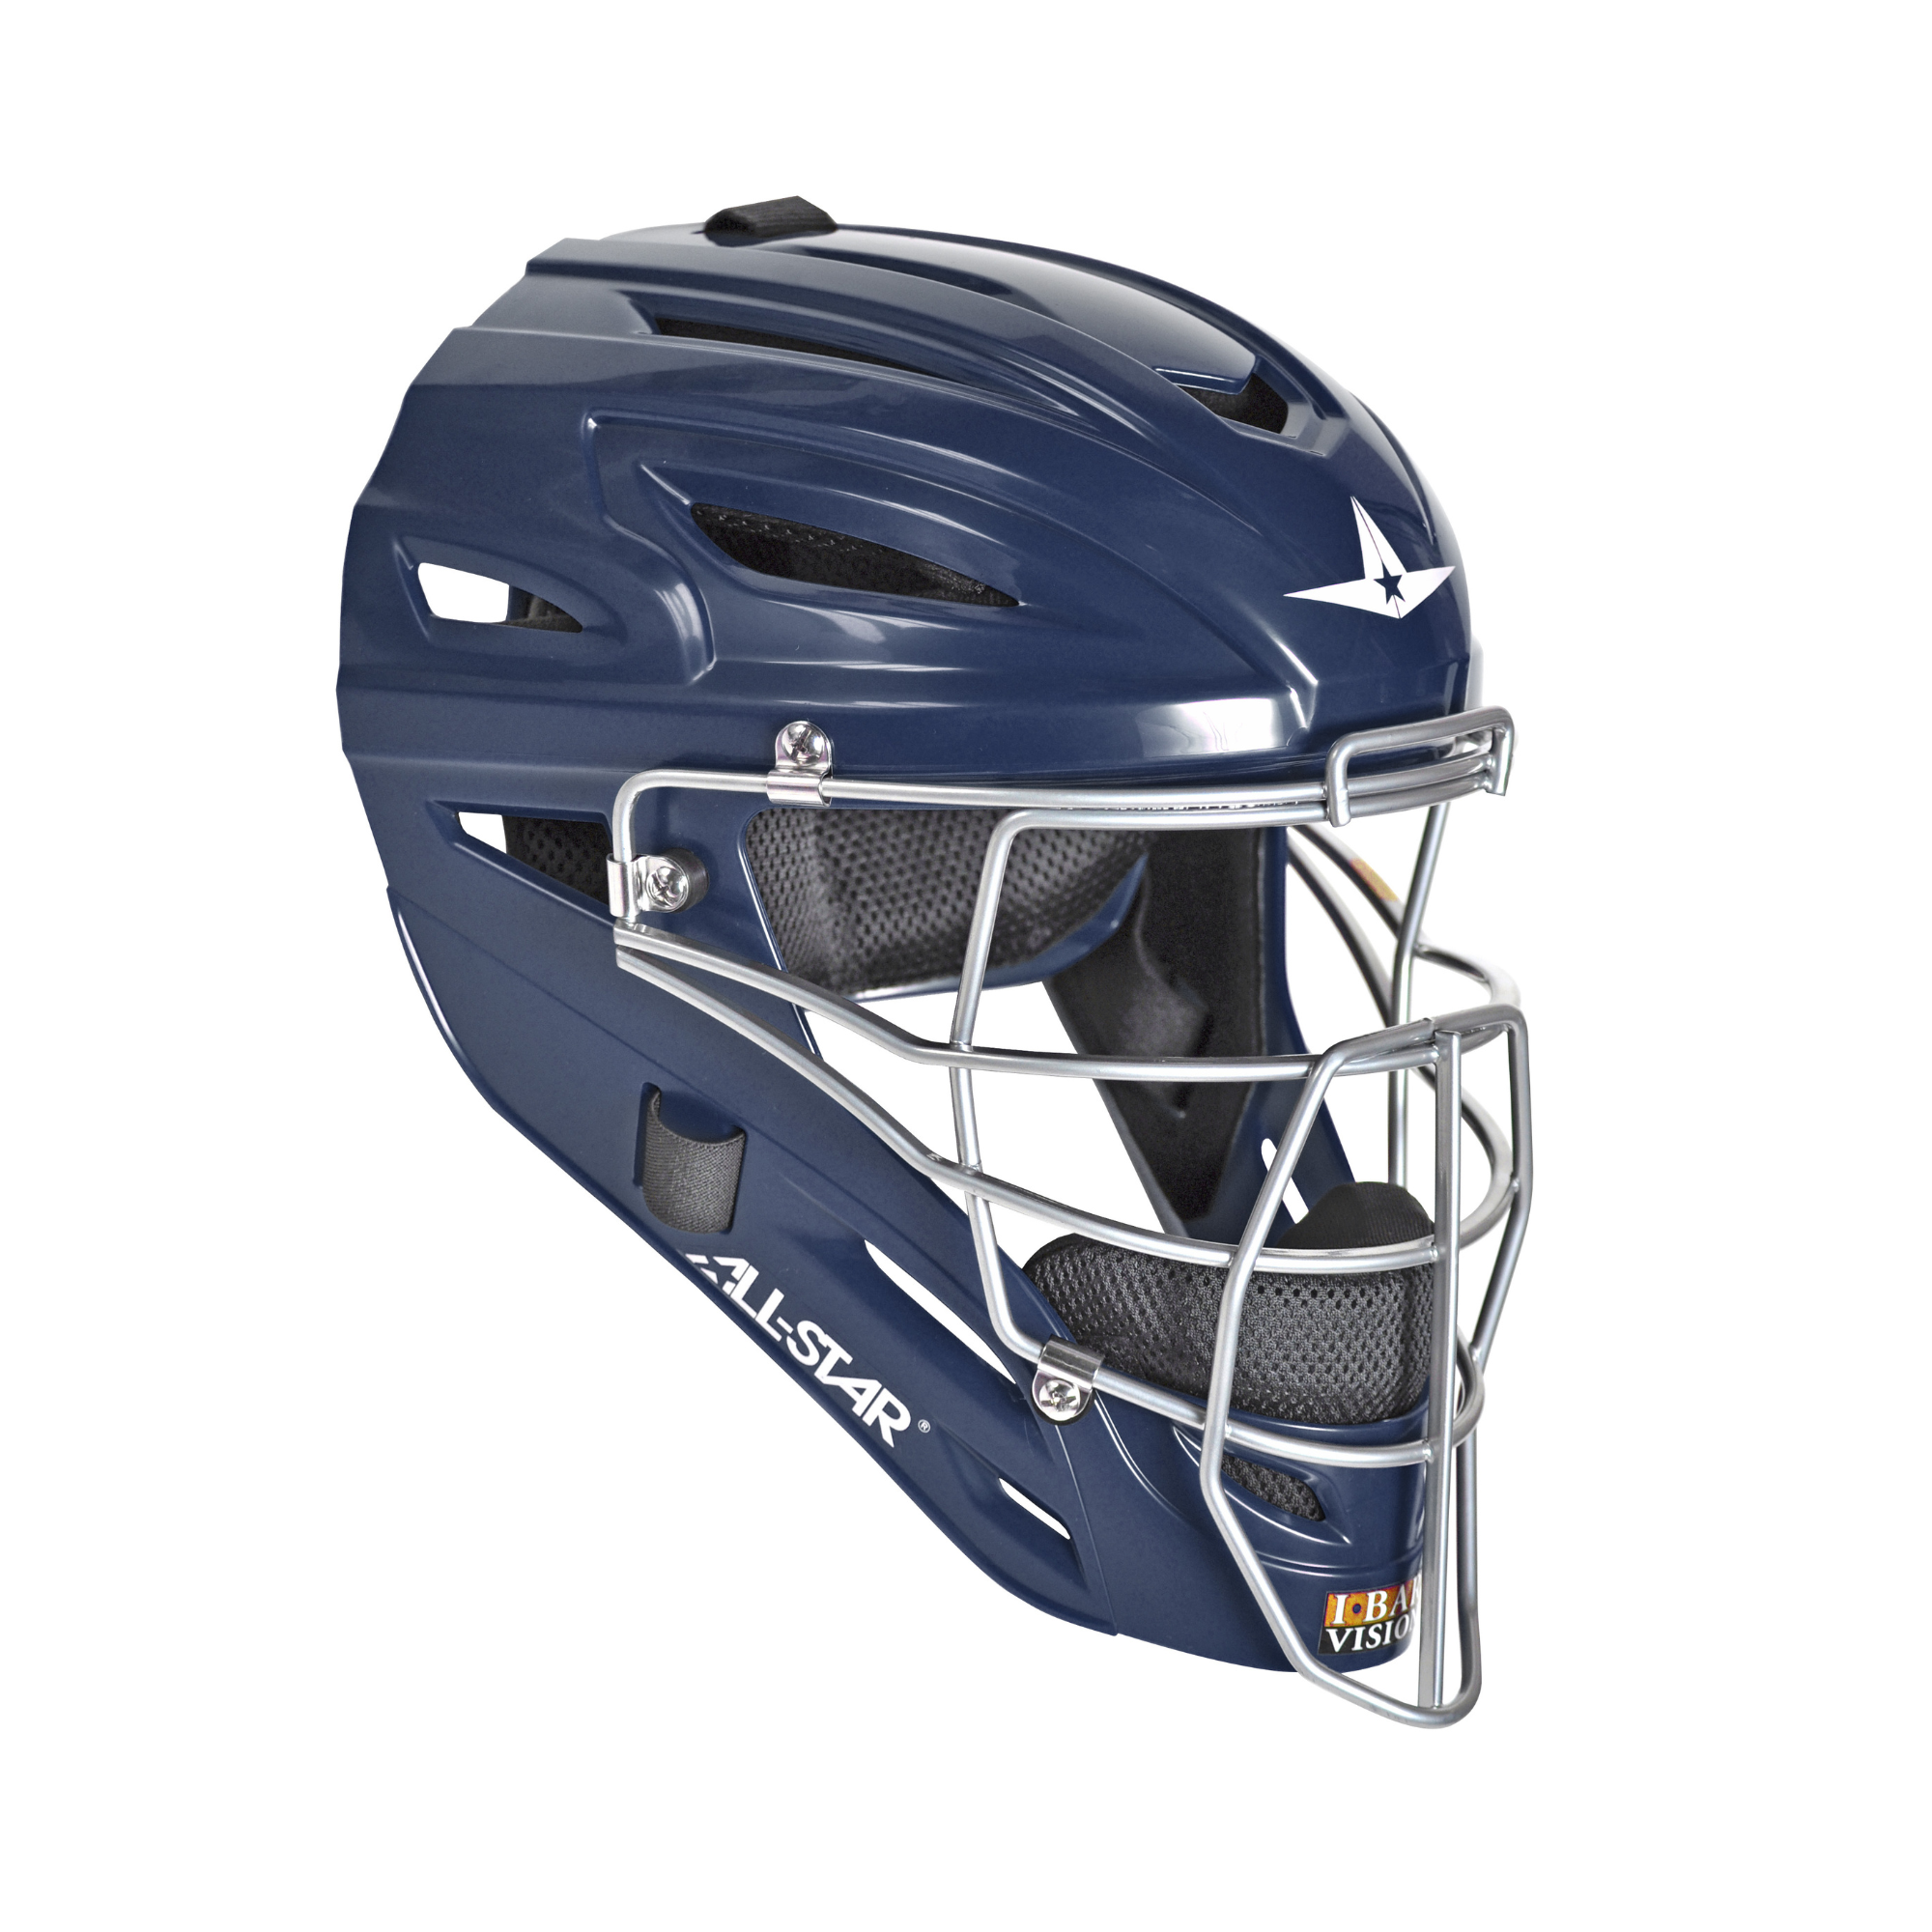 All-Star S7 Axis / Helmets / Ages 12-16